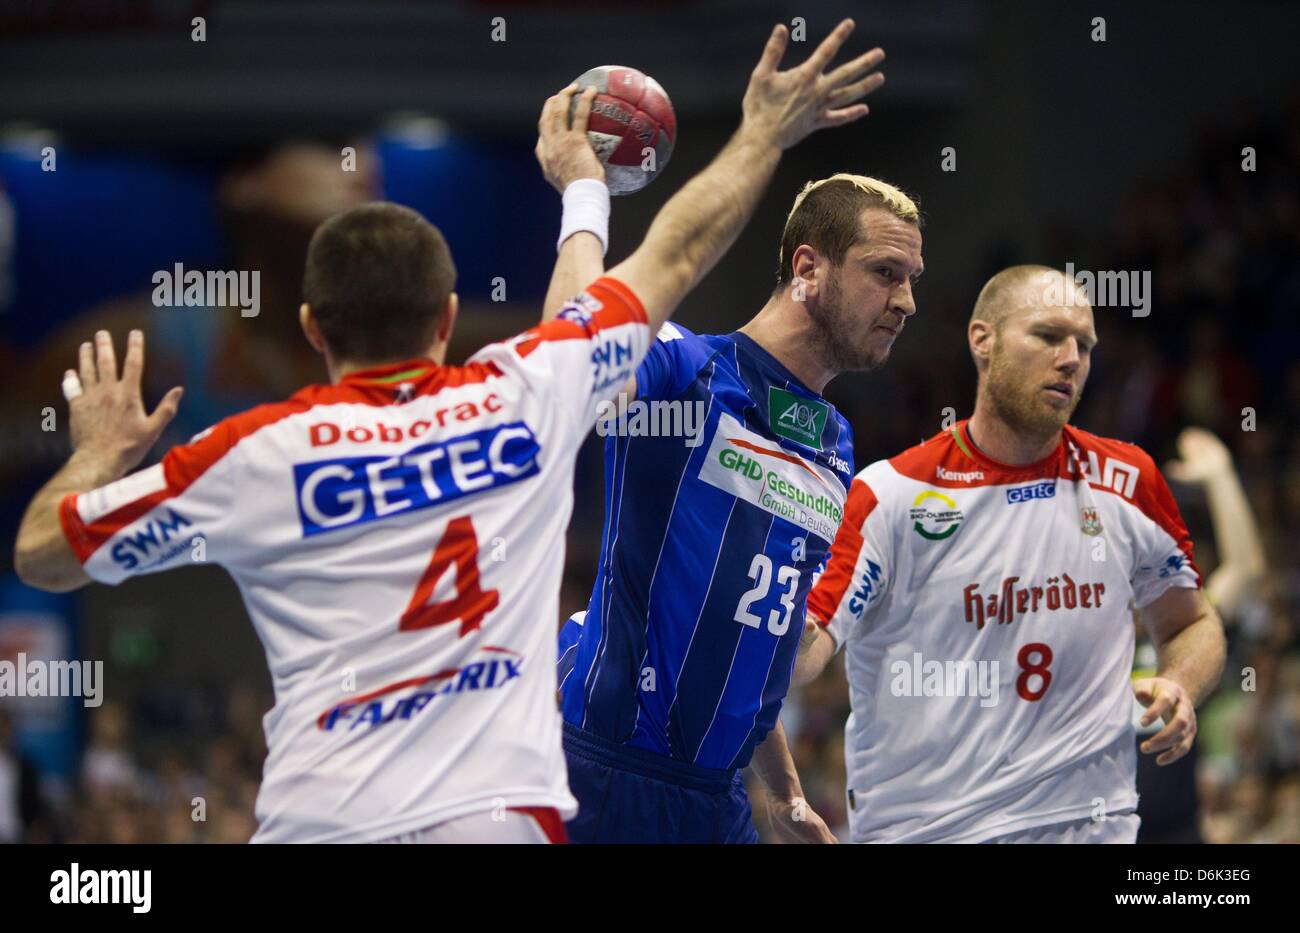 Hamburg's Pascal Hens (M) in action against Magdeburg's Damir Doborac (L) and Ales Pajovic (R) during the German Bunddesliga handball match between SC Magdeburg and HSV Hamburg at the Getec-Arena in Magdeburg, Germany, 31 March 2012. Photo: Jens Wolf Stock Photo